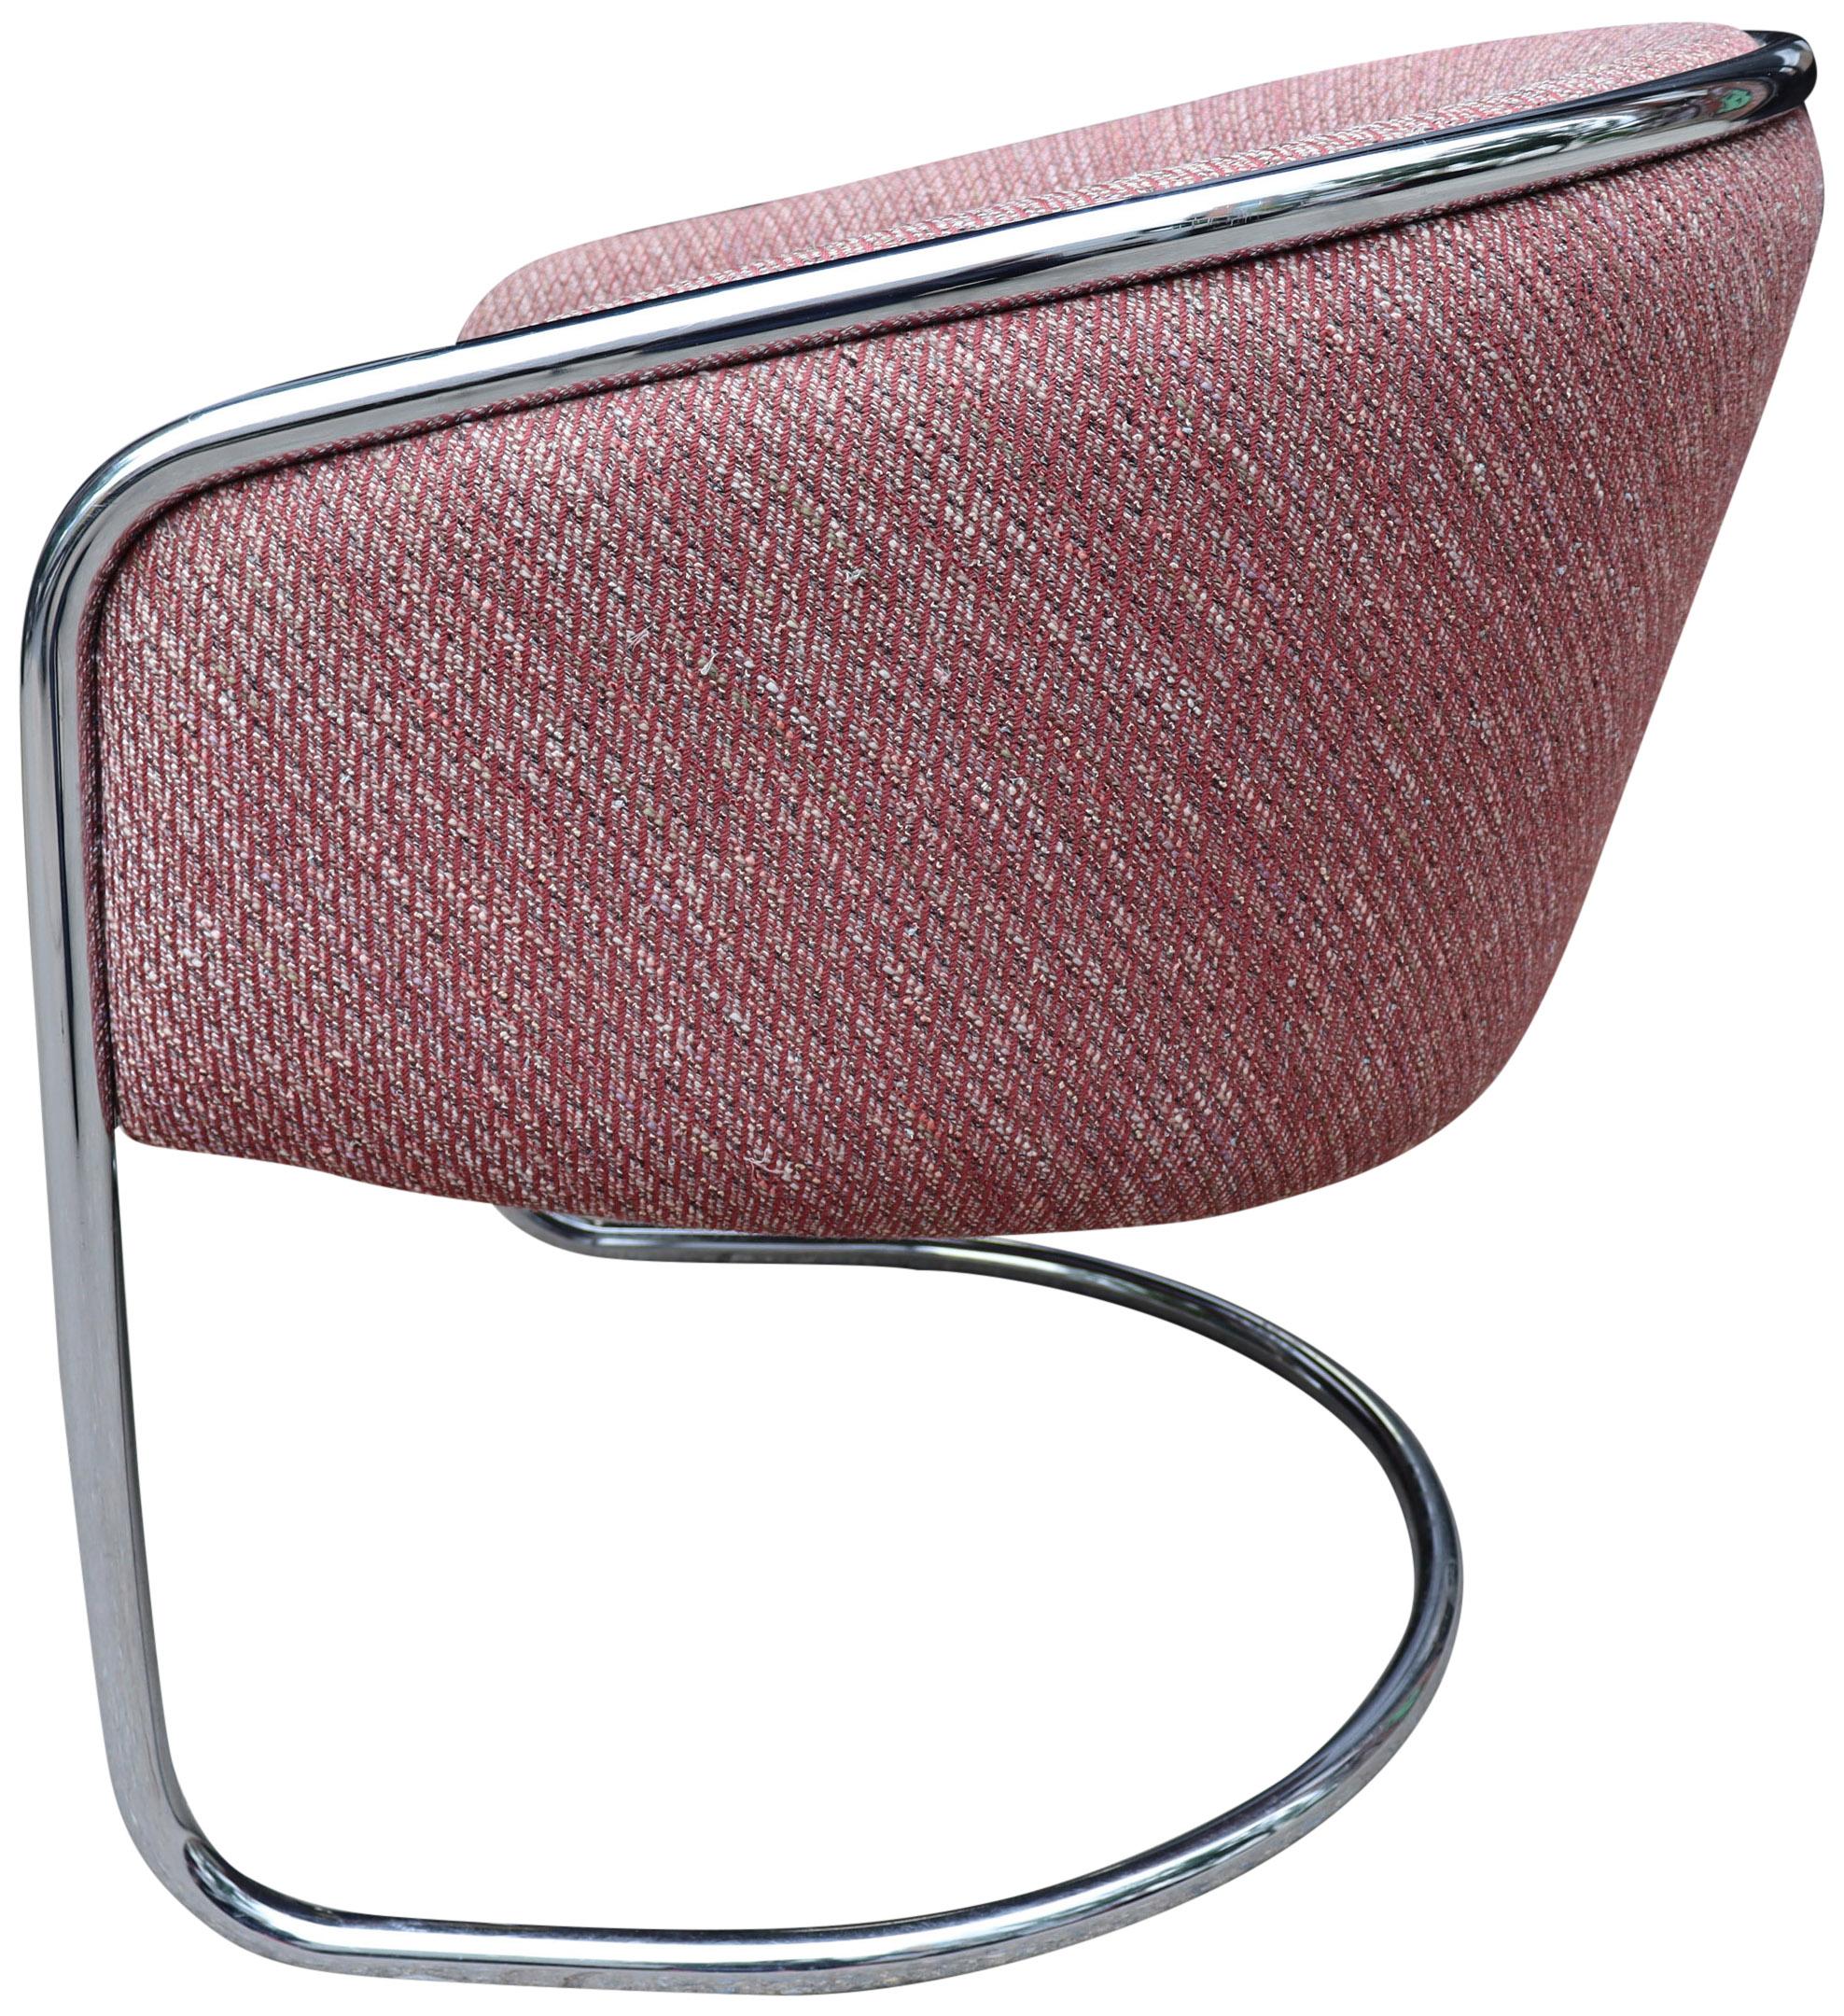 For your consideration is very comfortable lounge chair in a light red/ pink tweed wool fabric. Featuring an oversized cantilevered chrome frame that holds this amazing fabric. Incredibly formable and ready for use. A nice 80's take on the BRNO